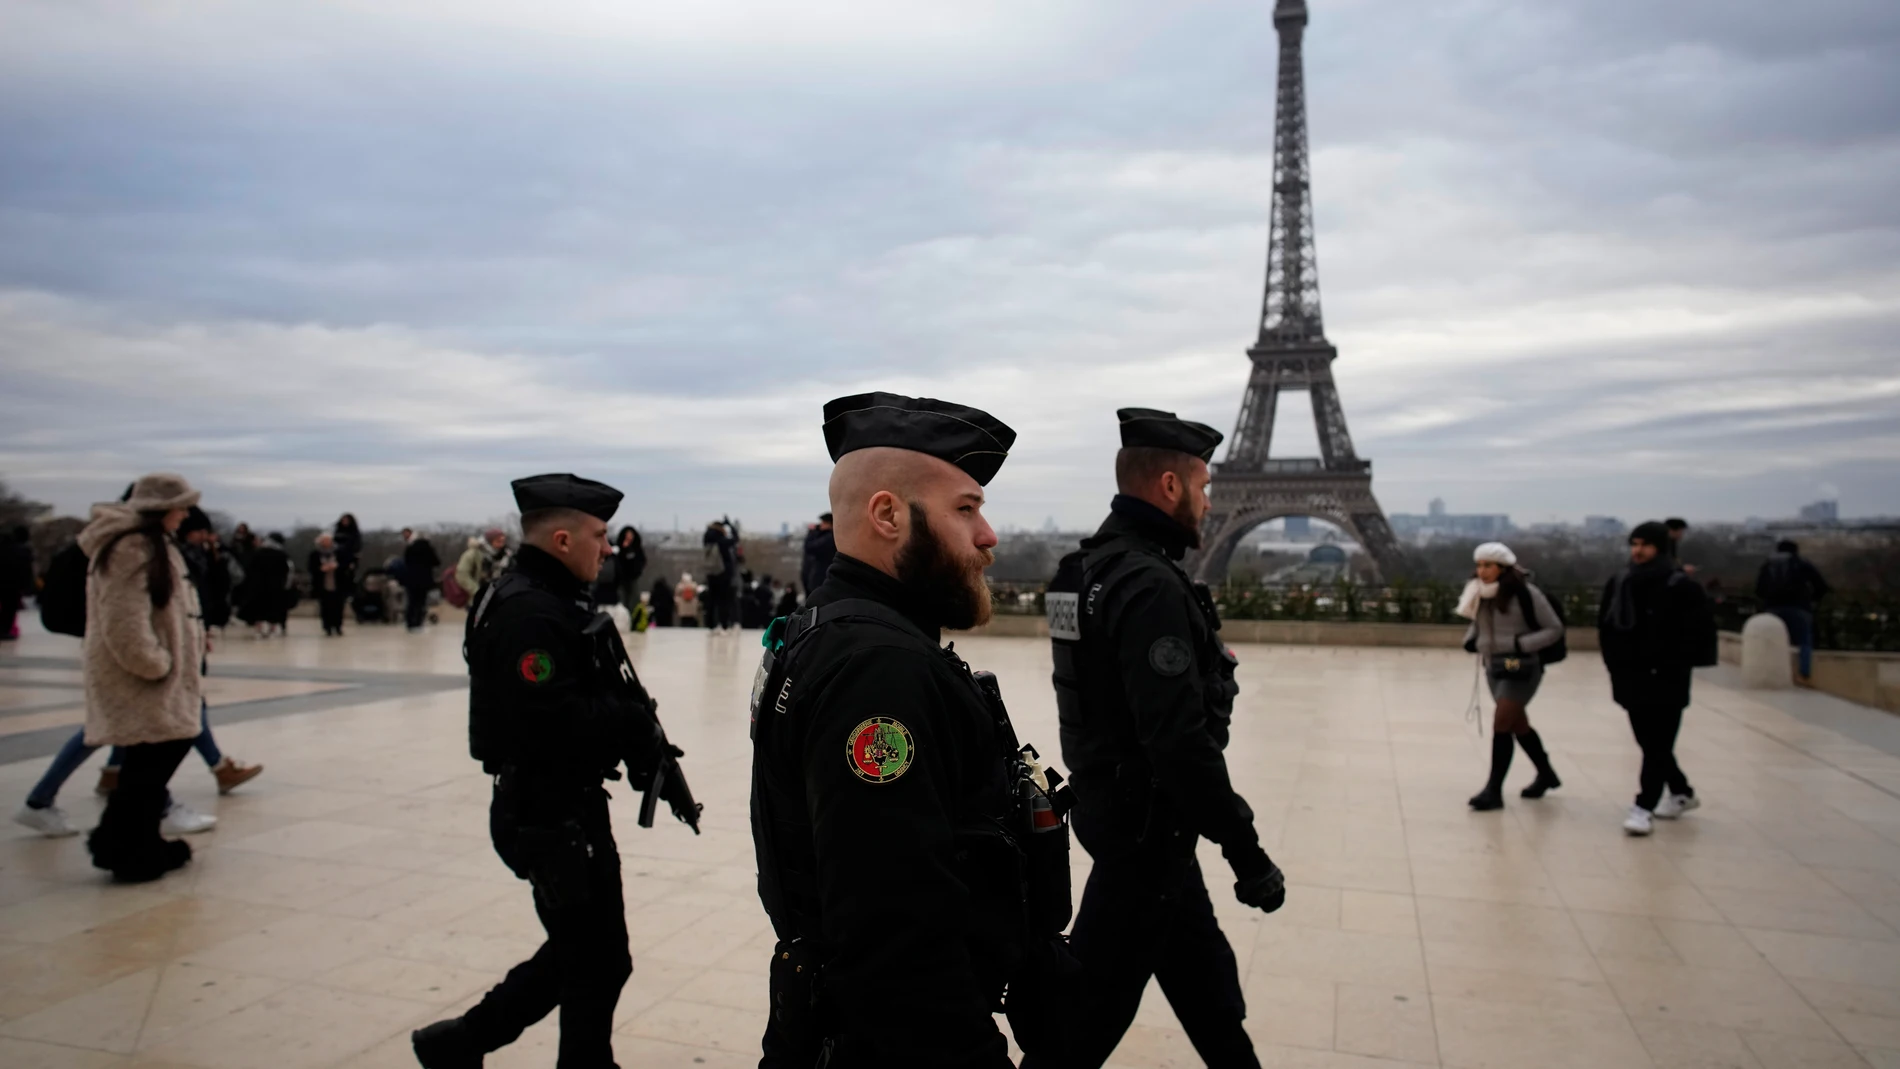 French gendarmes patrol the Trocadero plaza near the Eiffel Tower after a man targeted passersbys late saturday, killing a German tourist with a knife and injuring two others in Paris, Sunday, Dec. 3, 2023. Police subdued the man, a 25-year-old French citizen who had spent four years in prison for a violent offense. After his arrest, he expressed anguish about Muslims dying, notably in the Palestinian territories. (AP Photo/Christophe Ena)